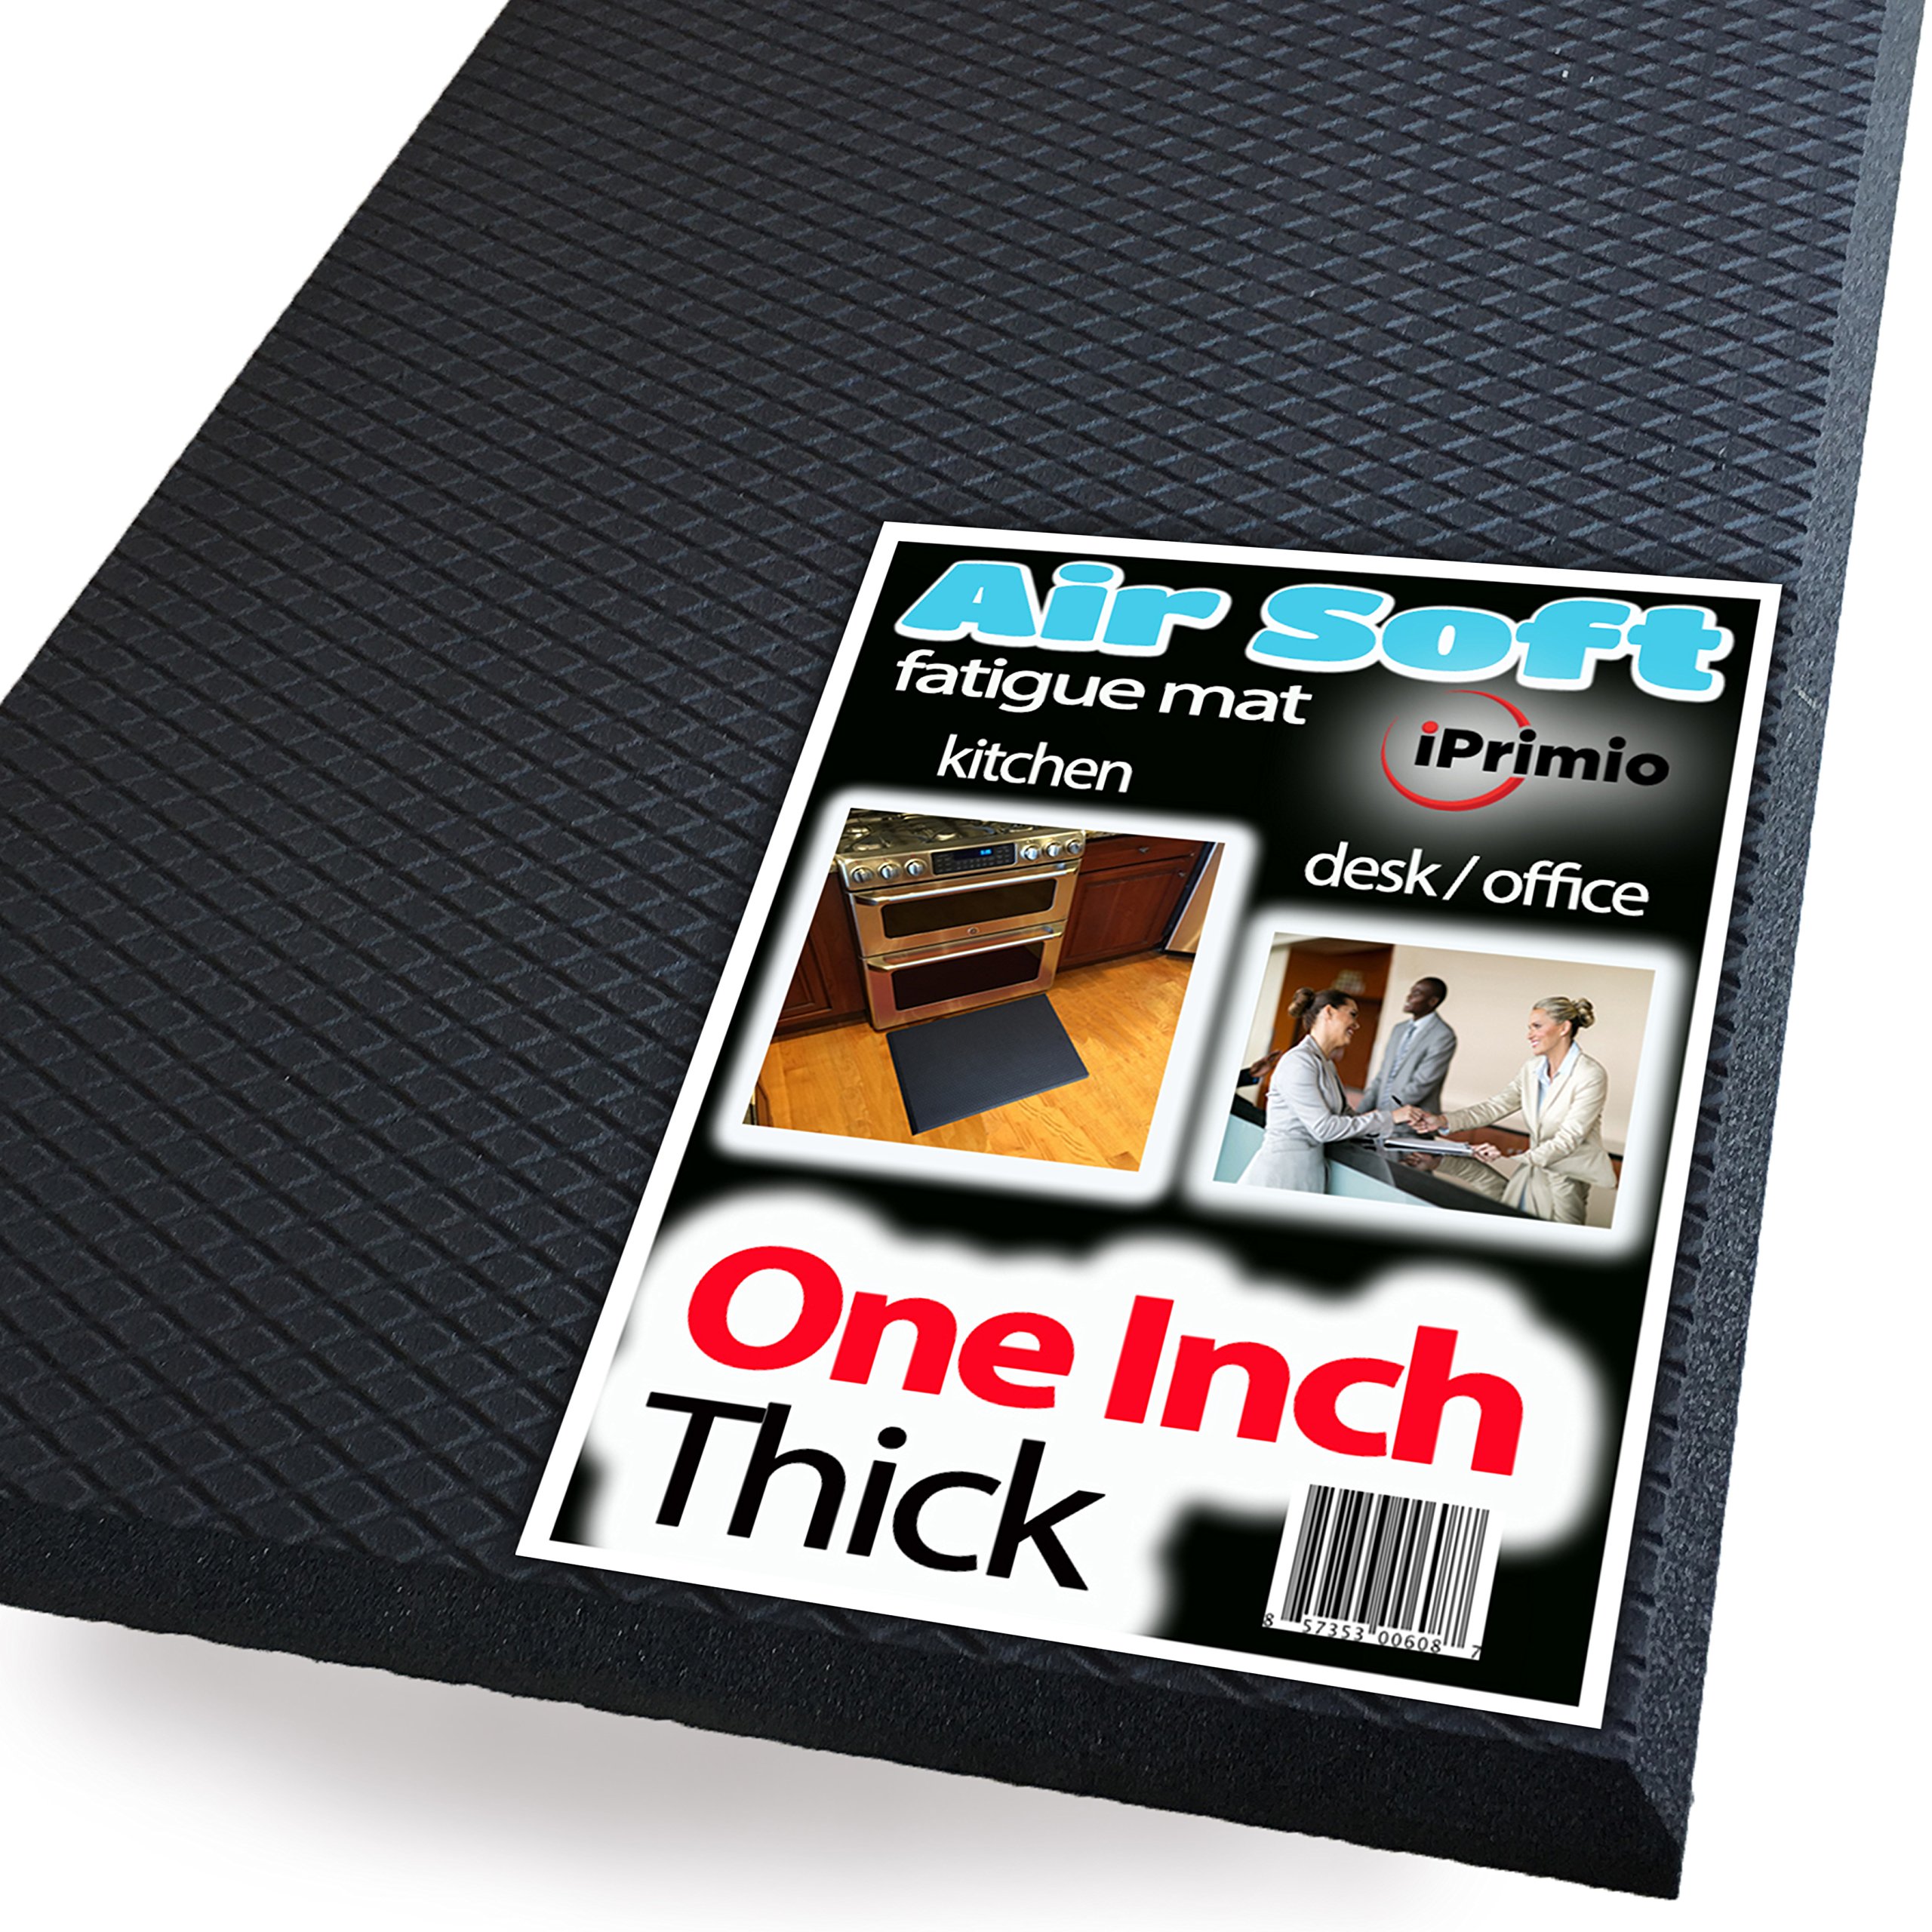 Extra Thick ONE INCH, Standing Anti Fatigue AIR SOFT Mat